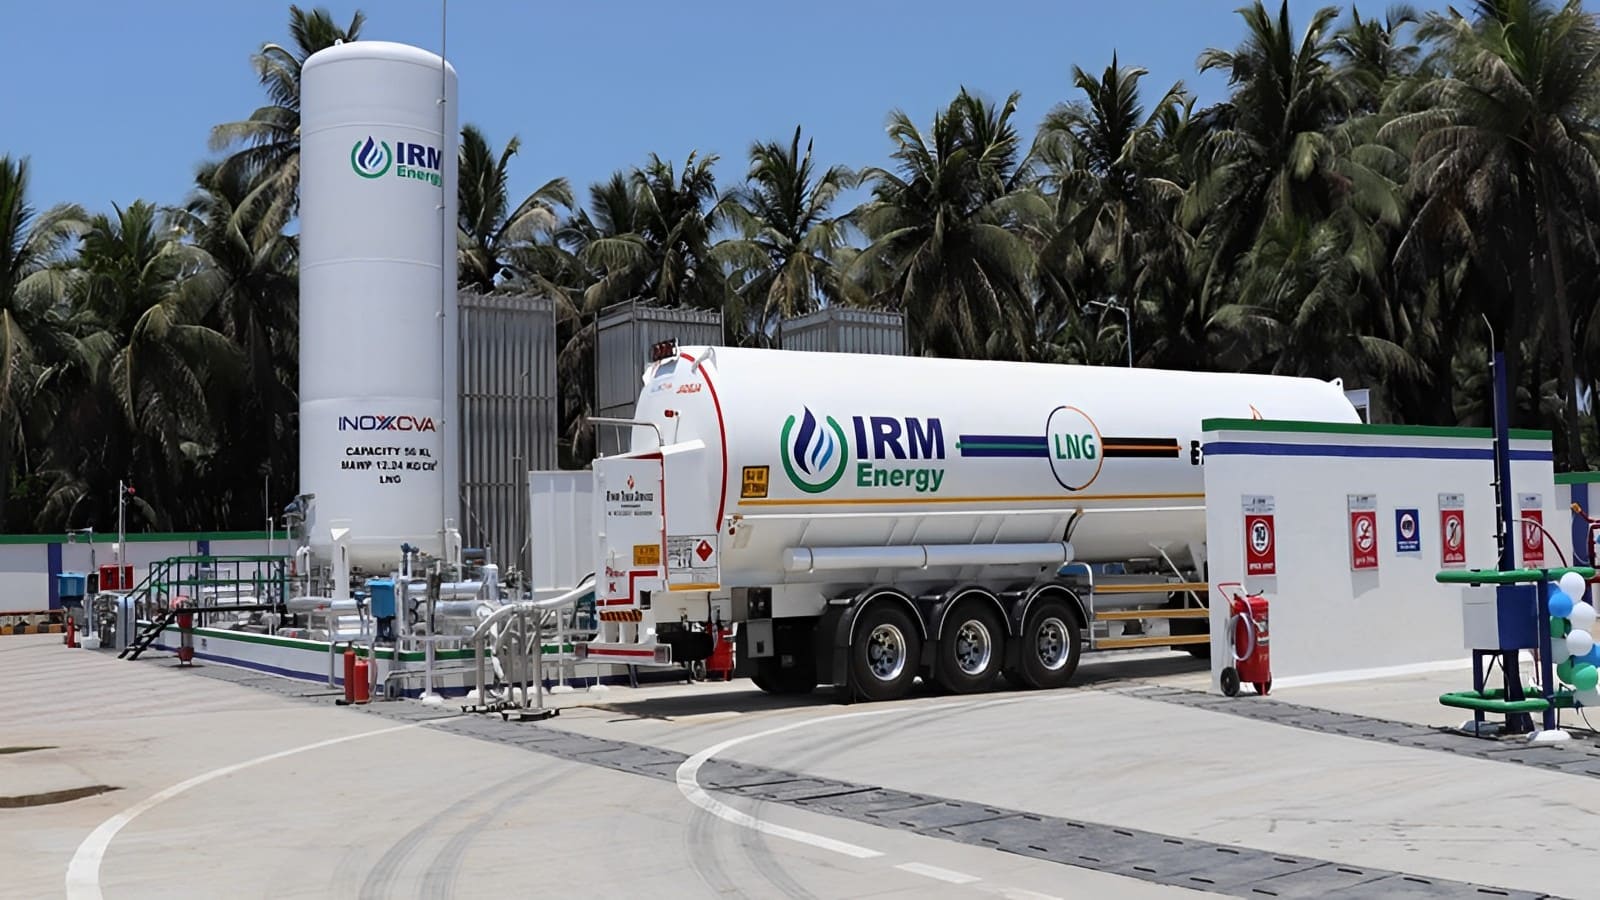 IRM Energy submits DRHP for upcoming IPO